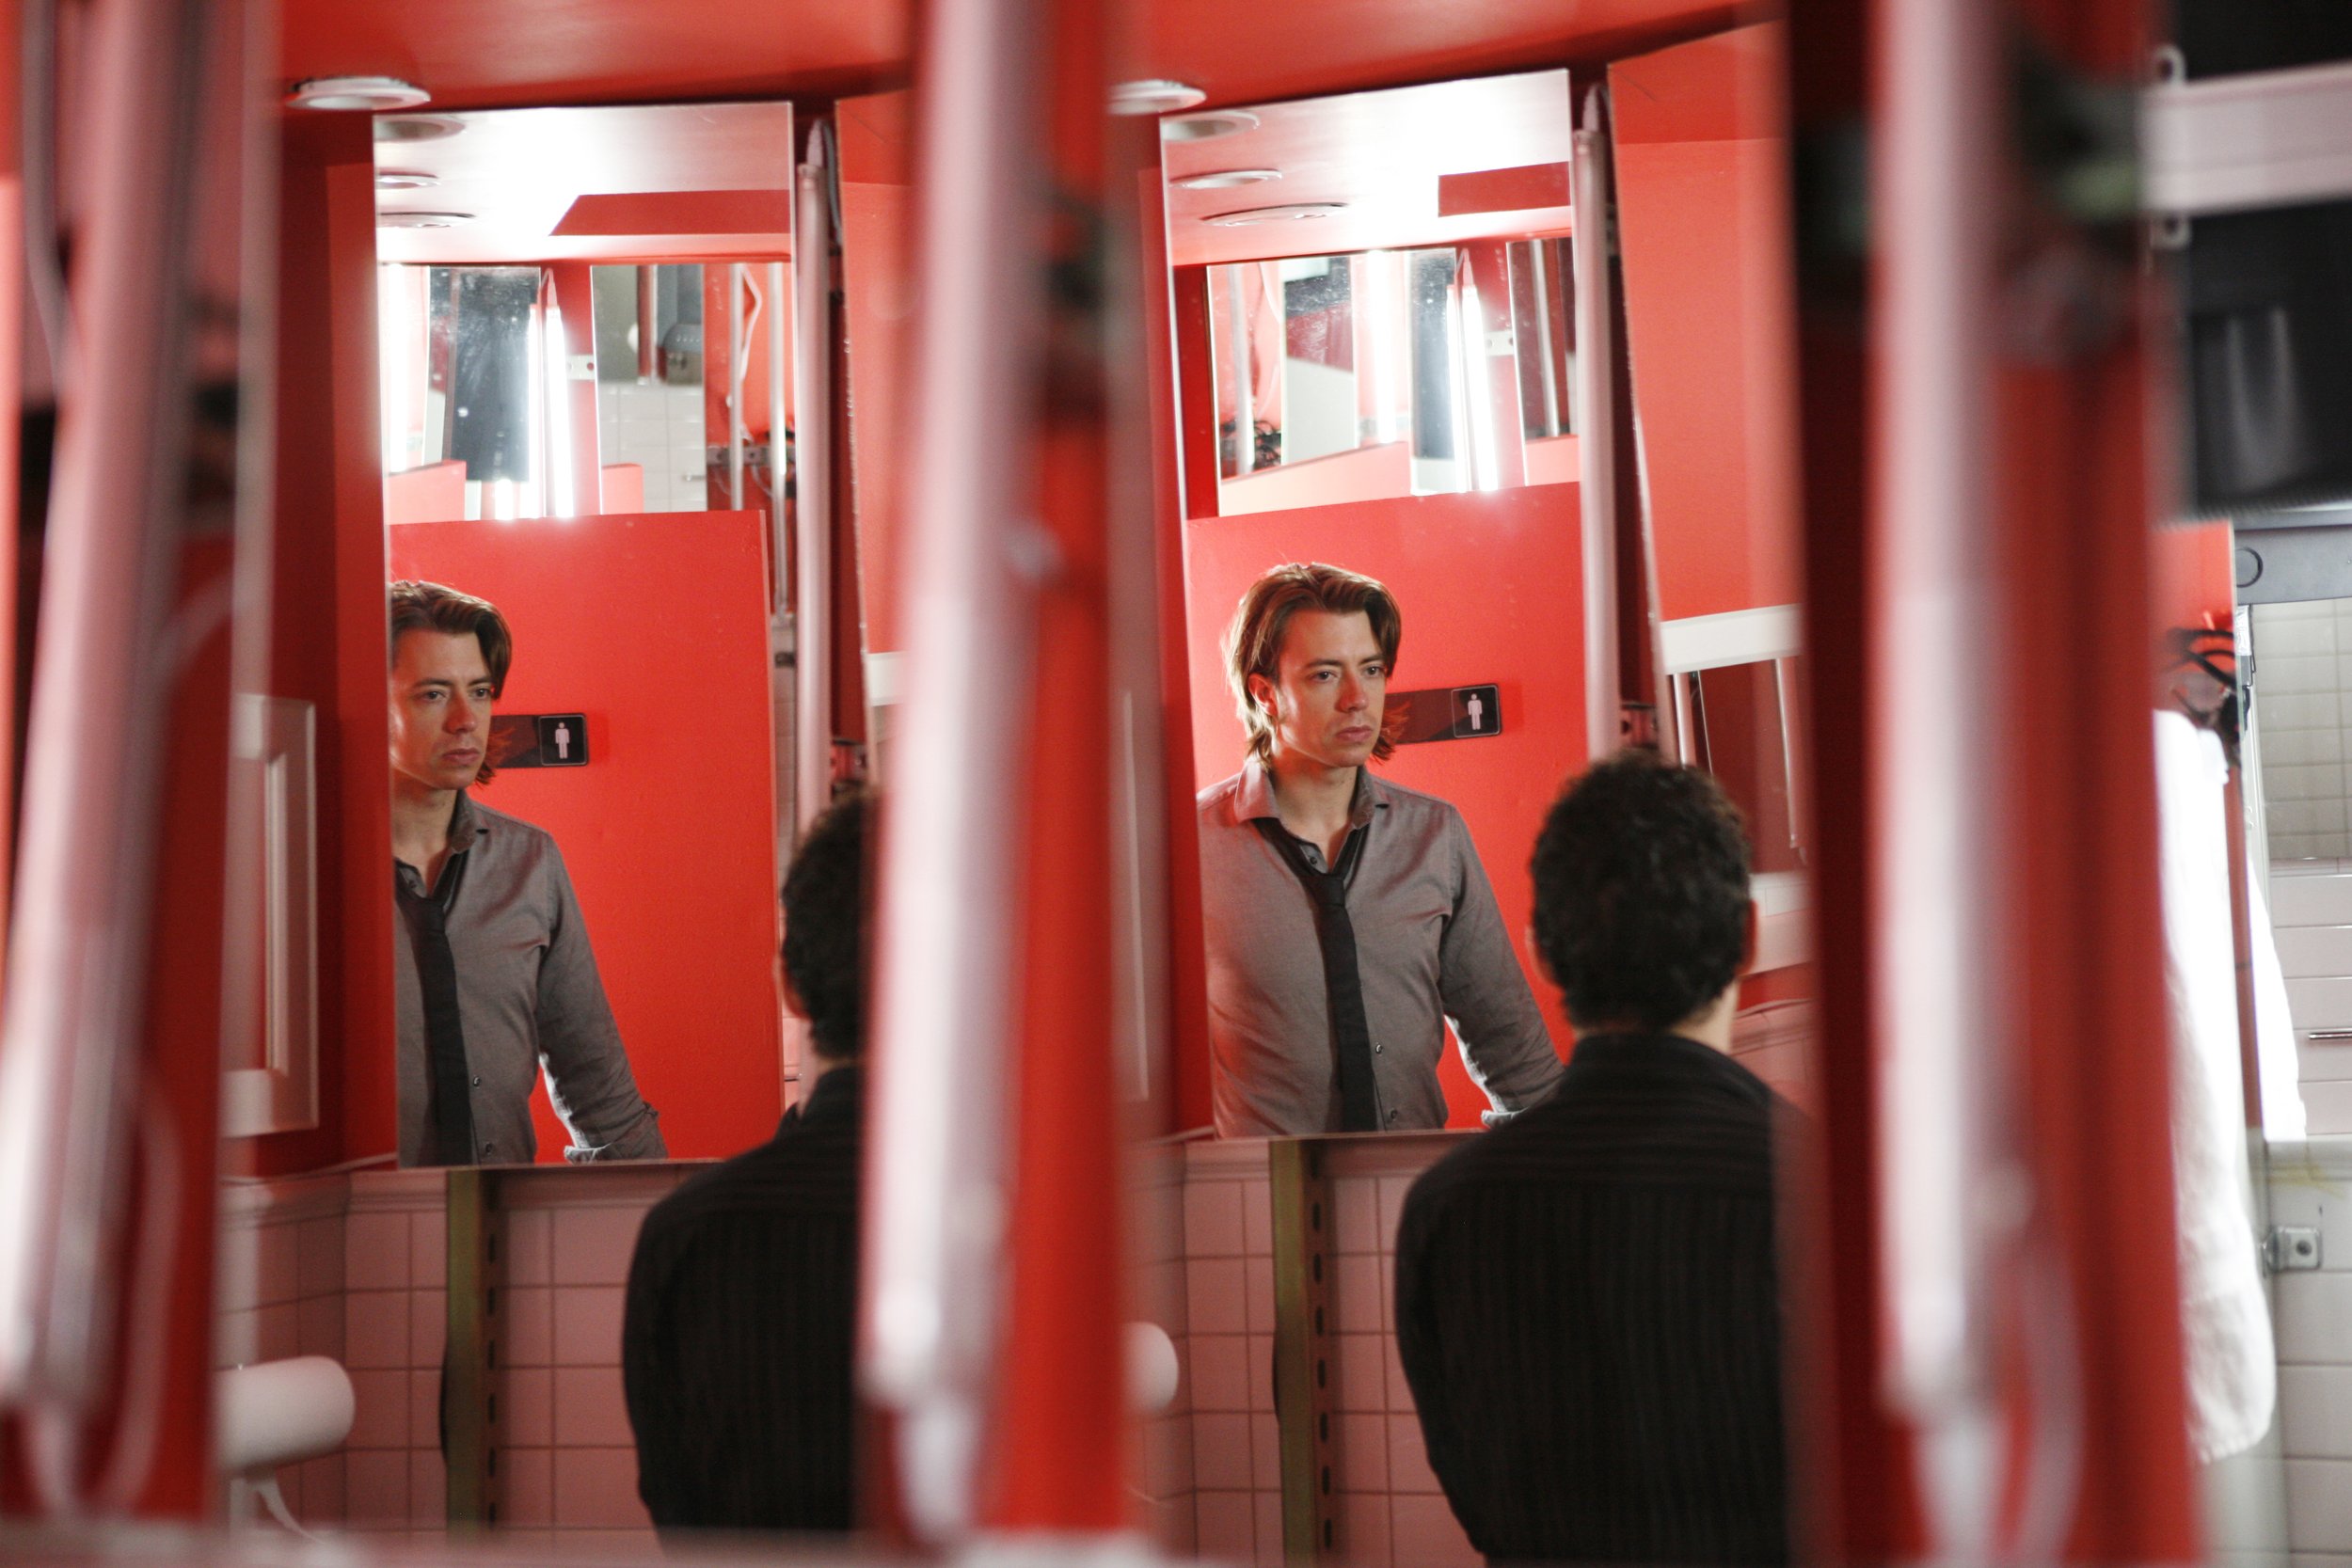 The duplicated reflections of a performer looking at the reflection of another performer in a row of mirrors in a public restroom. Photo by Julieta Cervantes.